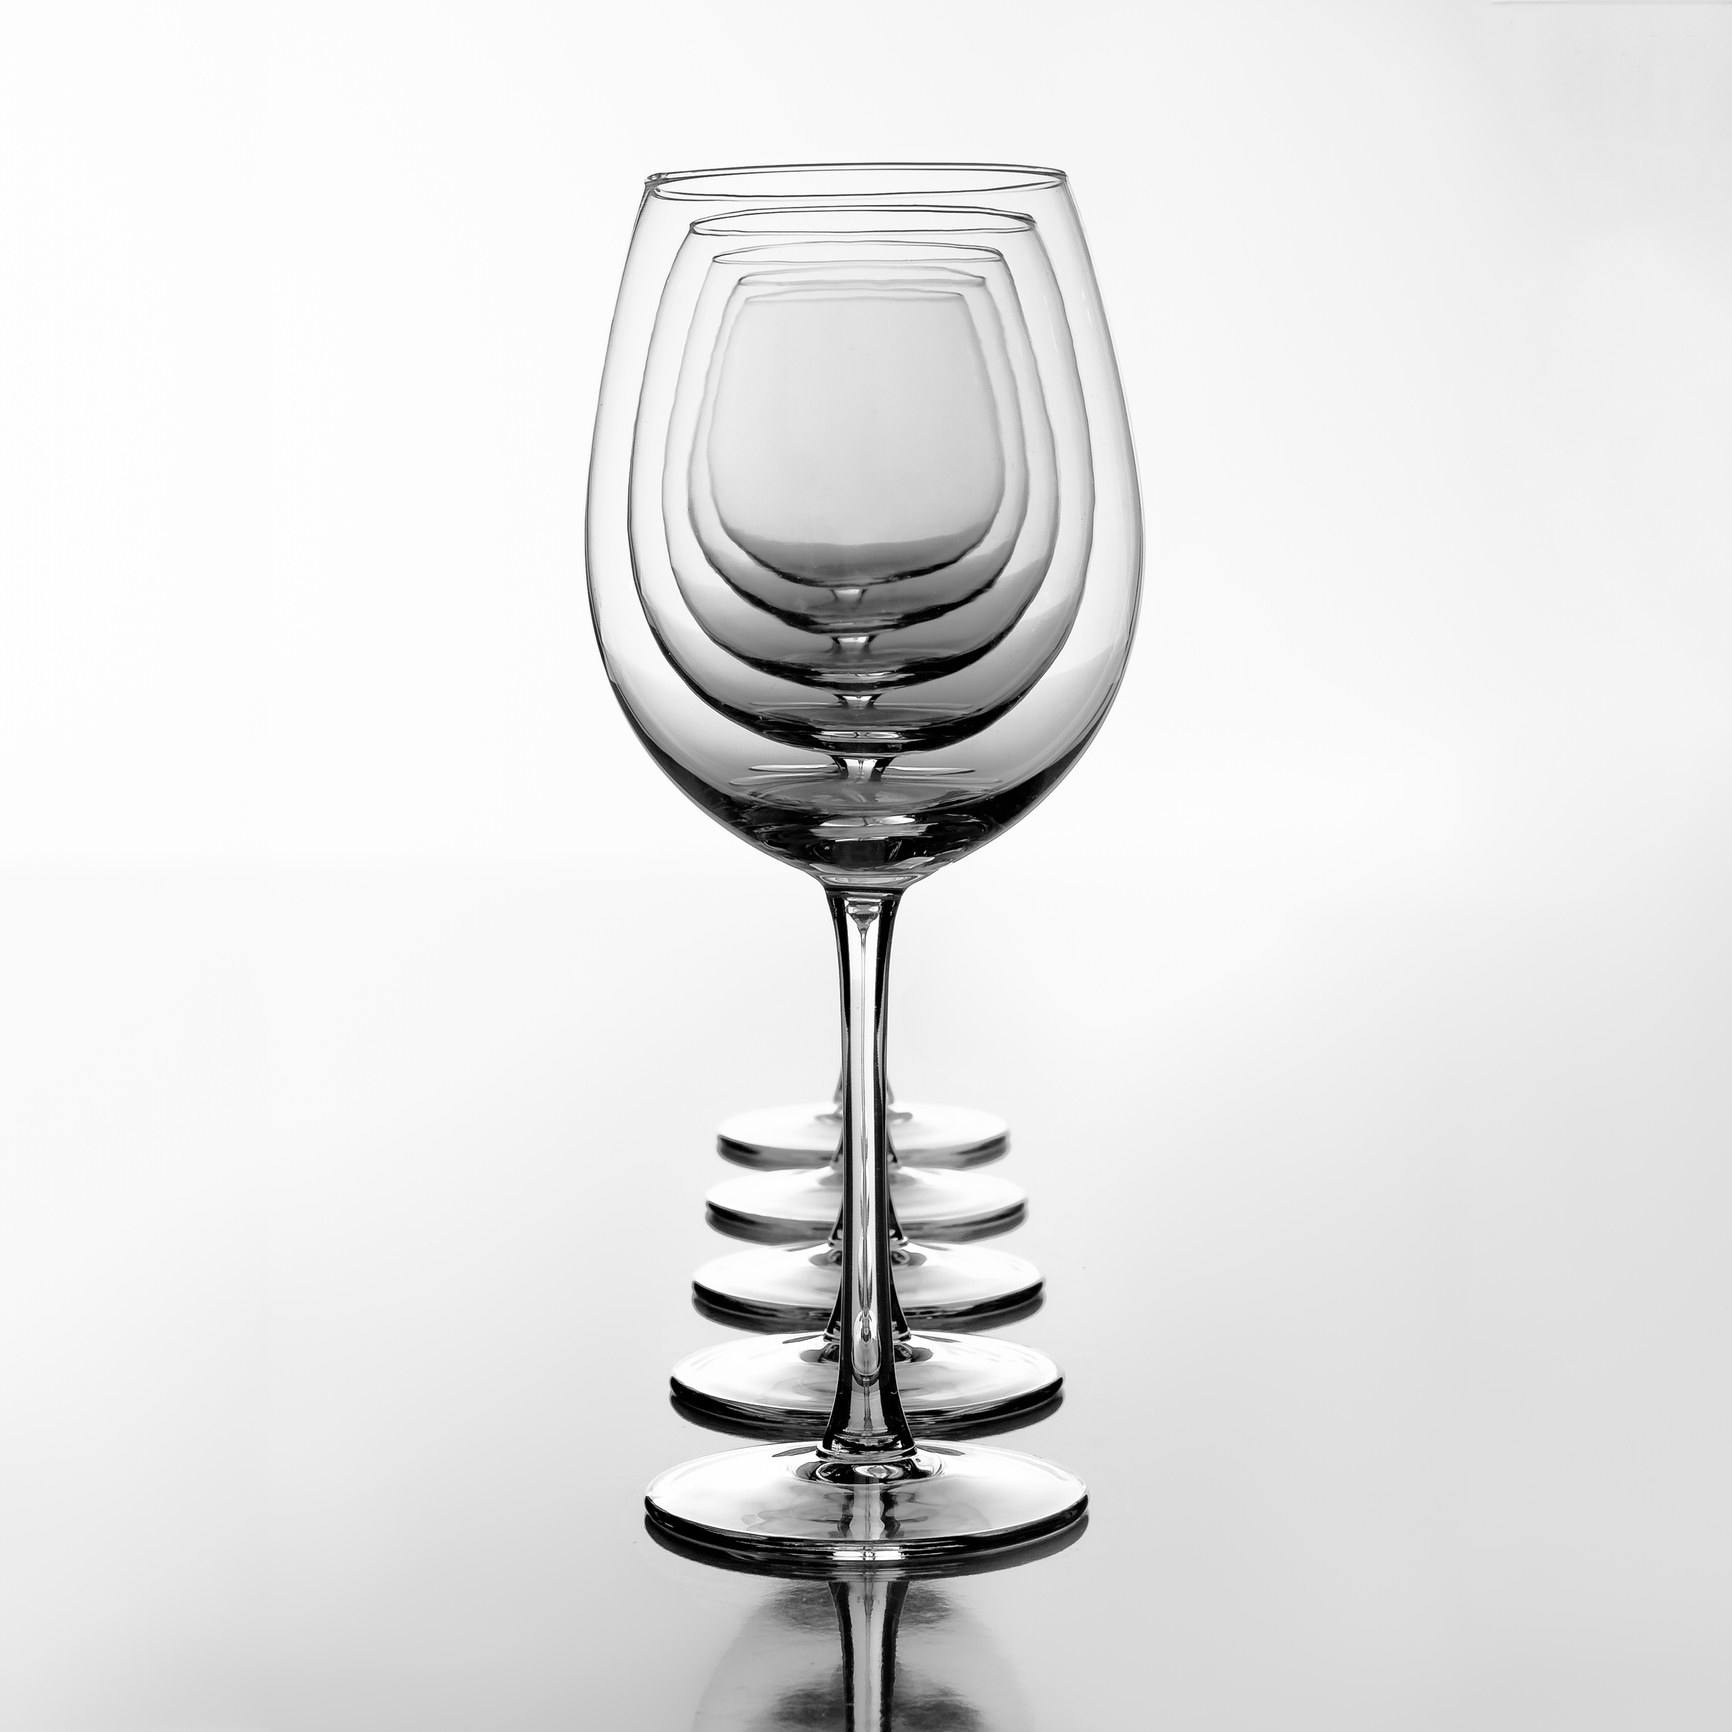 Multiple wine glasses on a white background